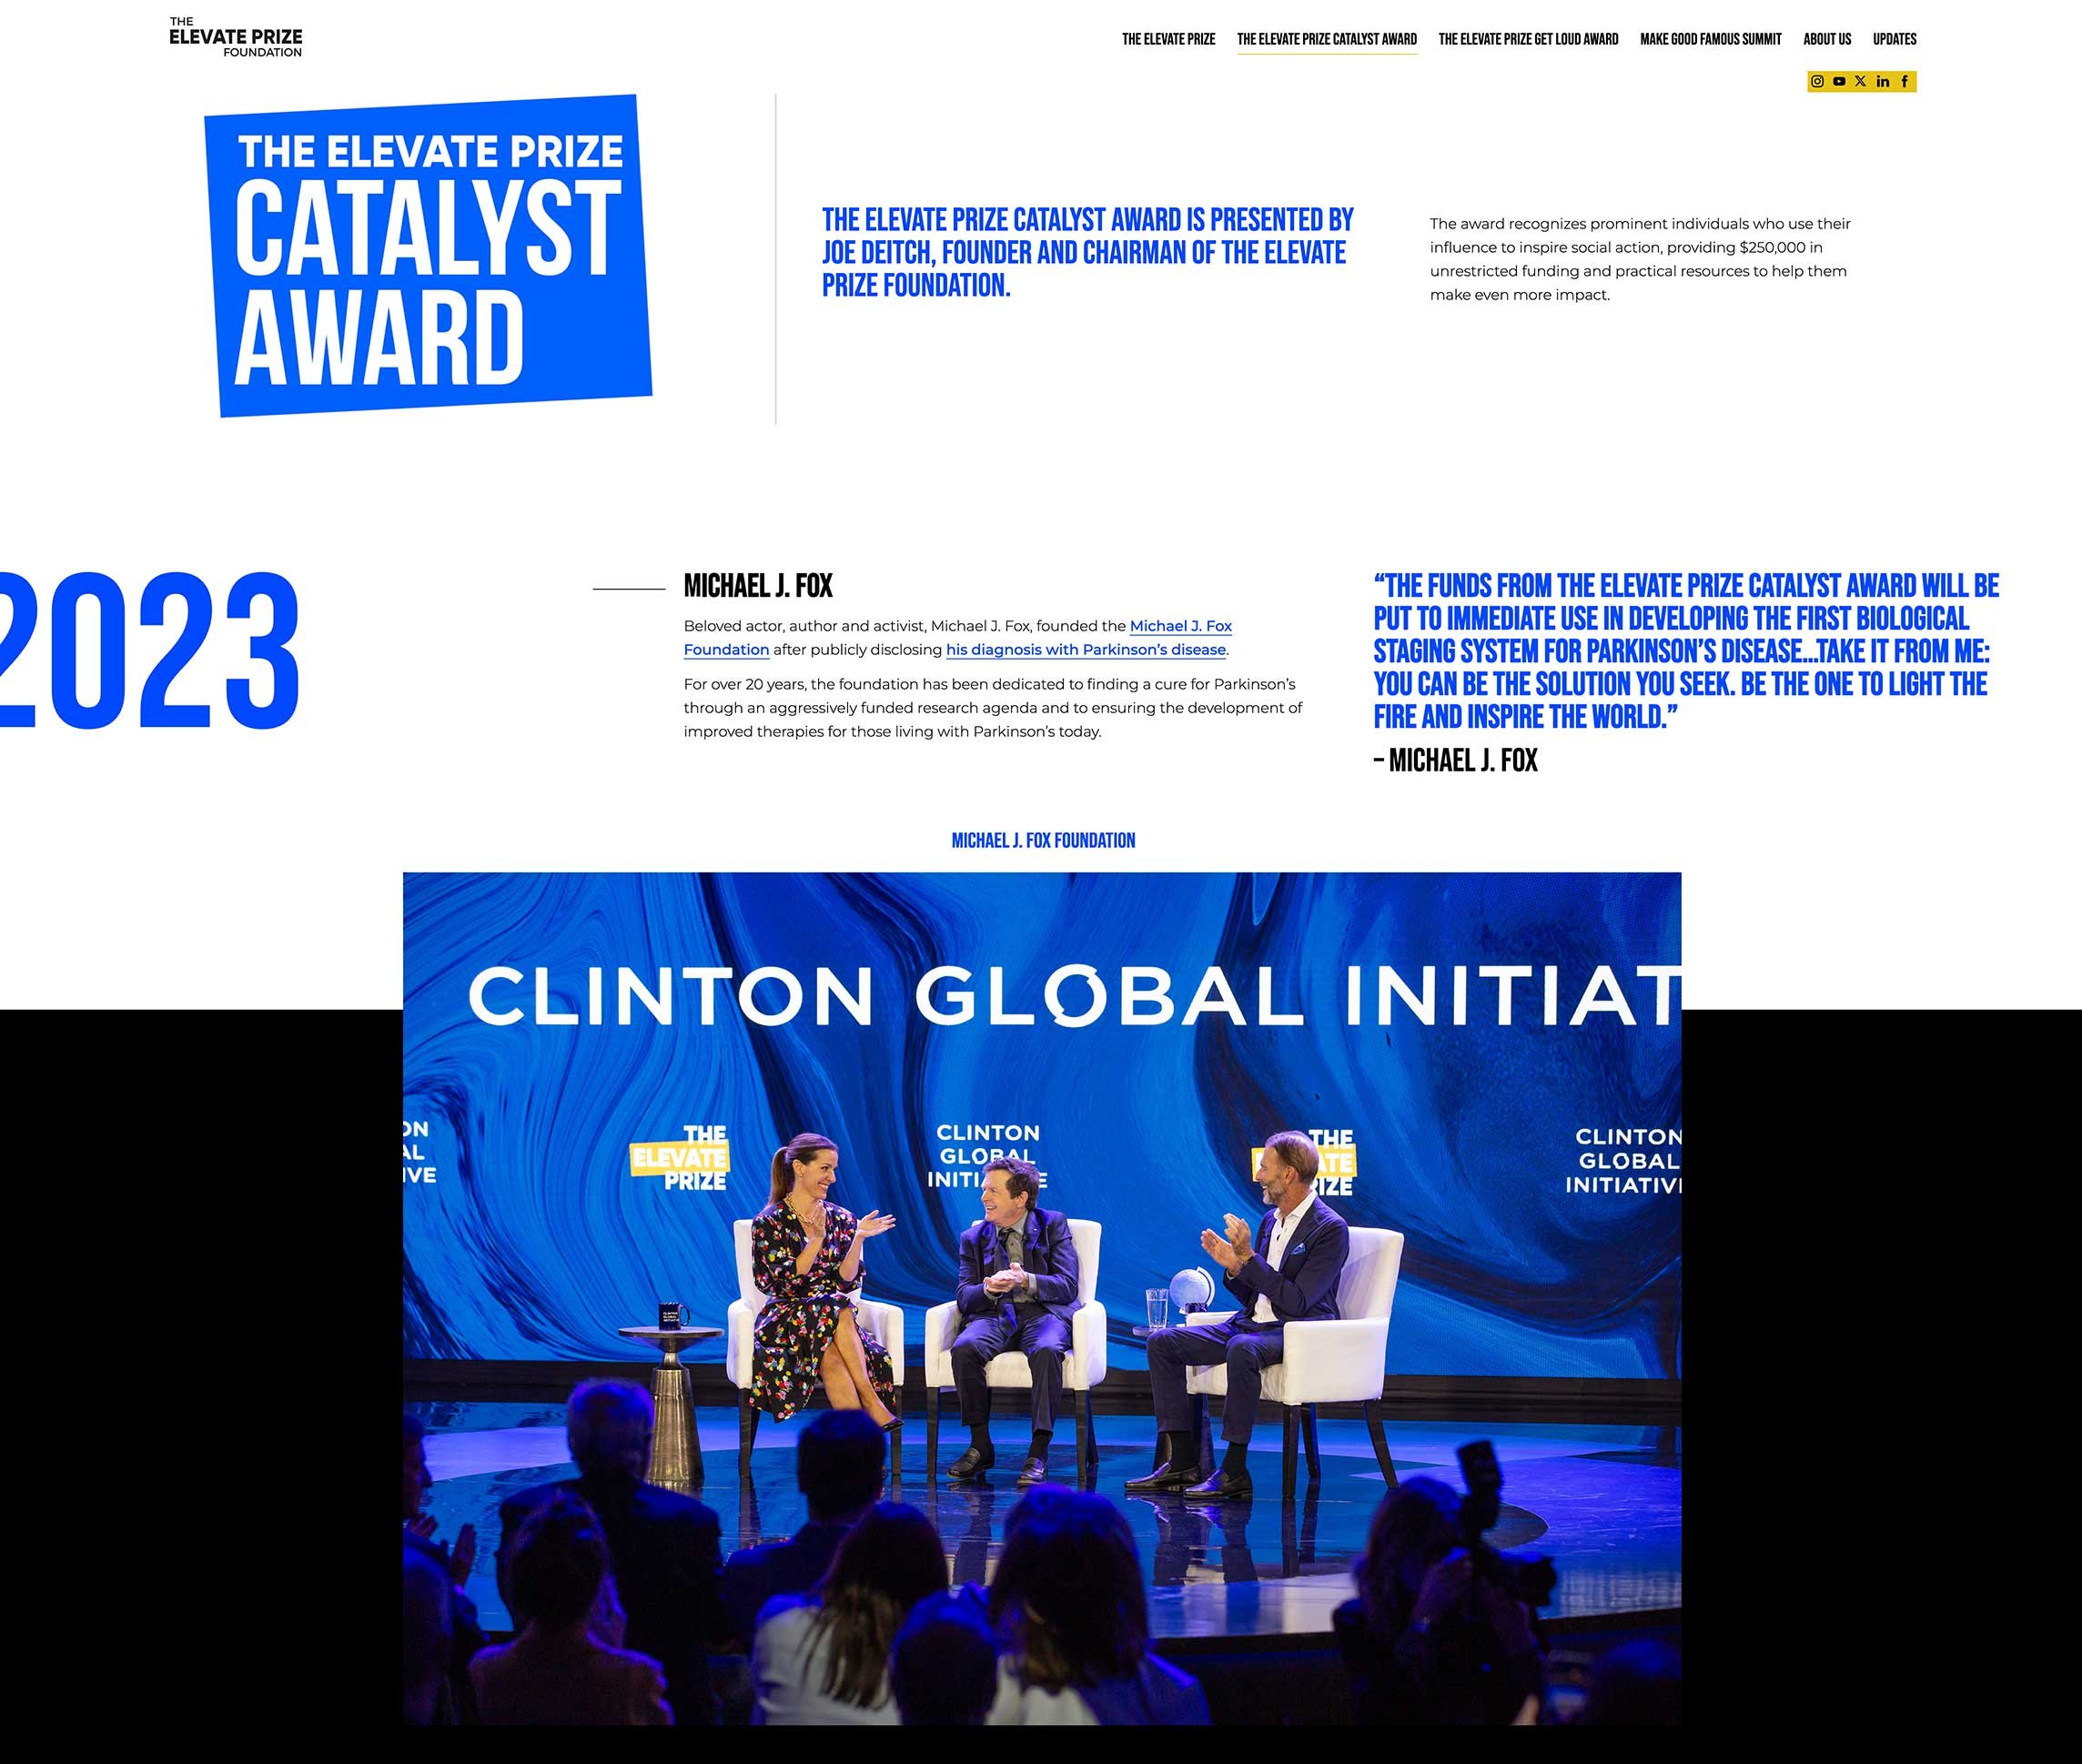  Michael J Fox Foundation receives The Elevate Prize Catalyst Award at Clinton Global Initiative 2023, presented by Joseph Deitch, founder of The Elevate Prize Foundation, and CEO Carolina Garcia Jayaram, New York, NY 